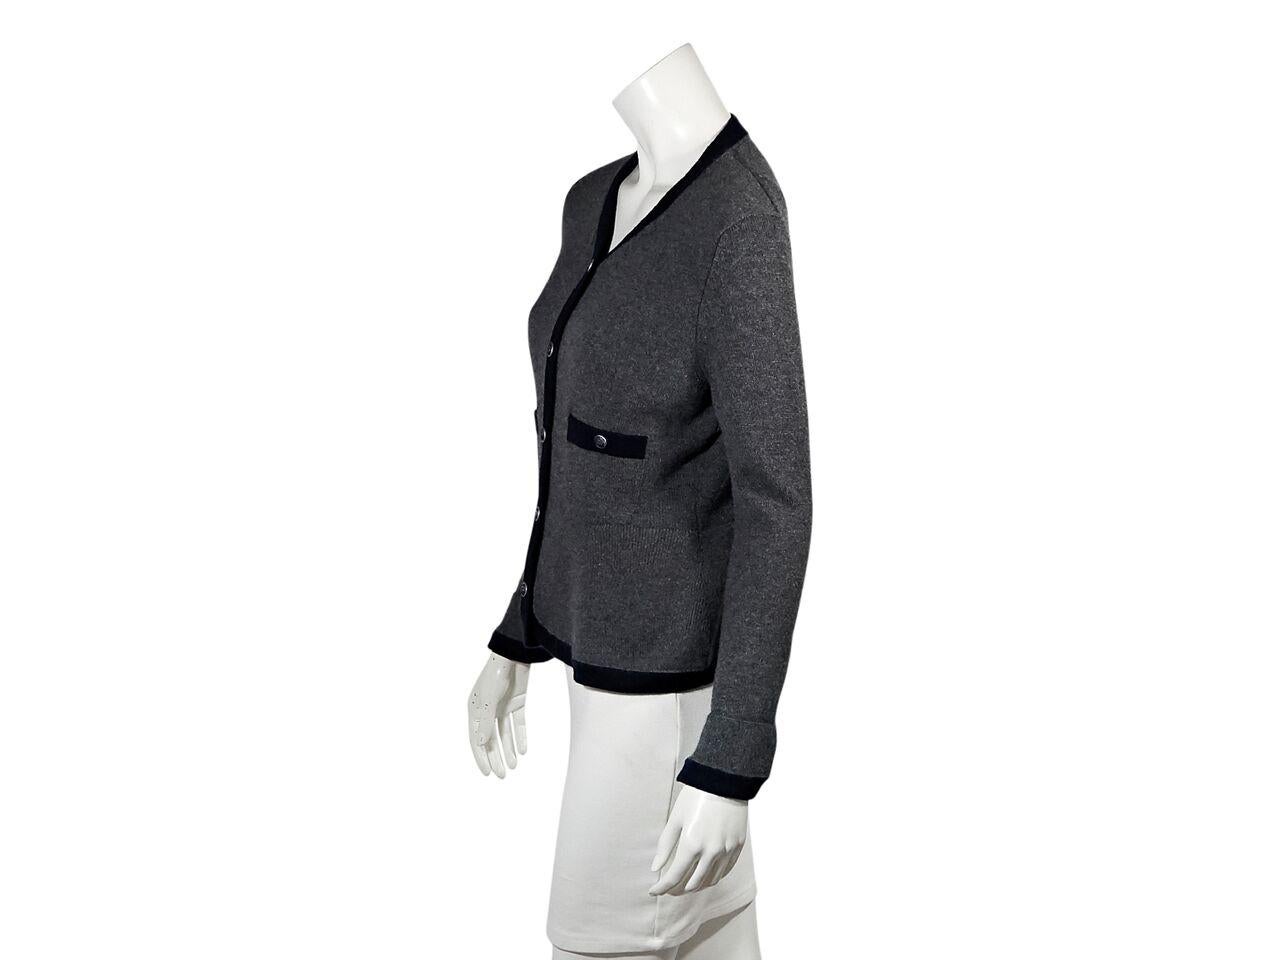 Product details:  Grey cashmere cardigan by Chanel.  V-neck.  Long sleeves.  Button-front closure.  Bust button patch pockets.  Silvertone hardware.  Label size FR 38.  34